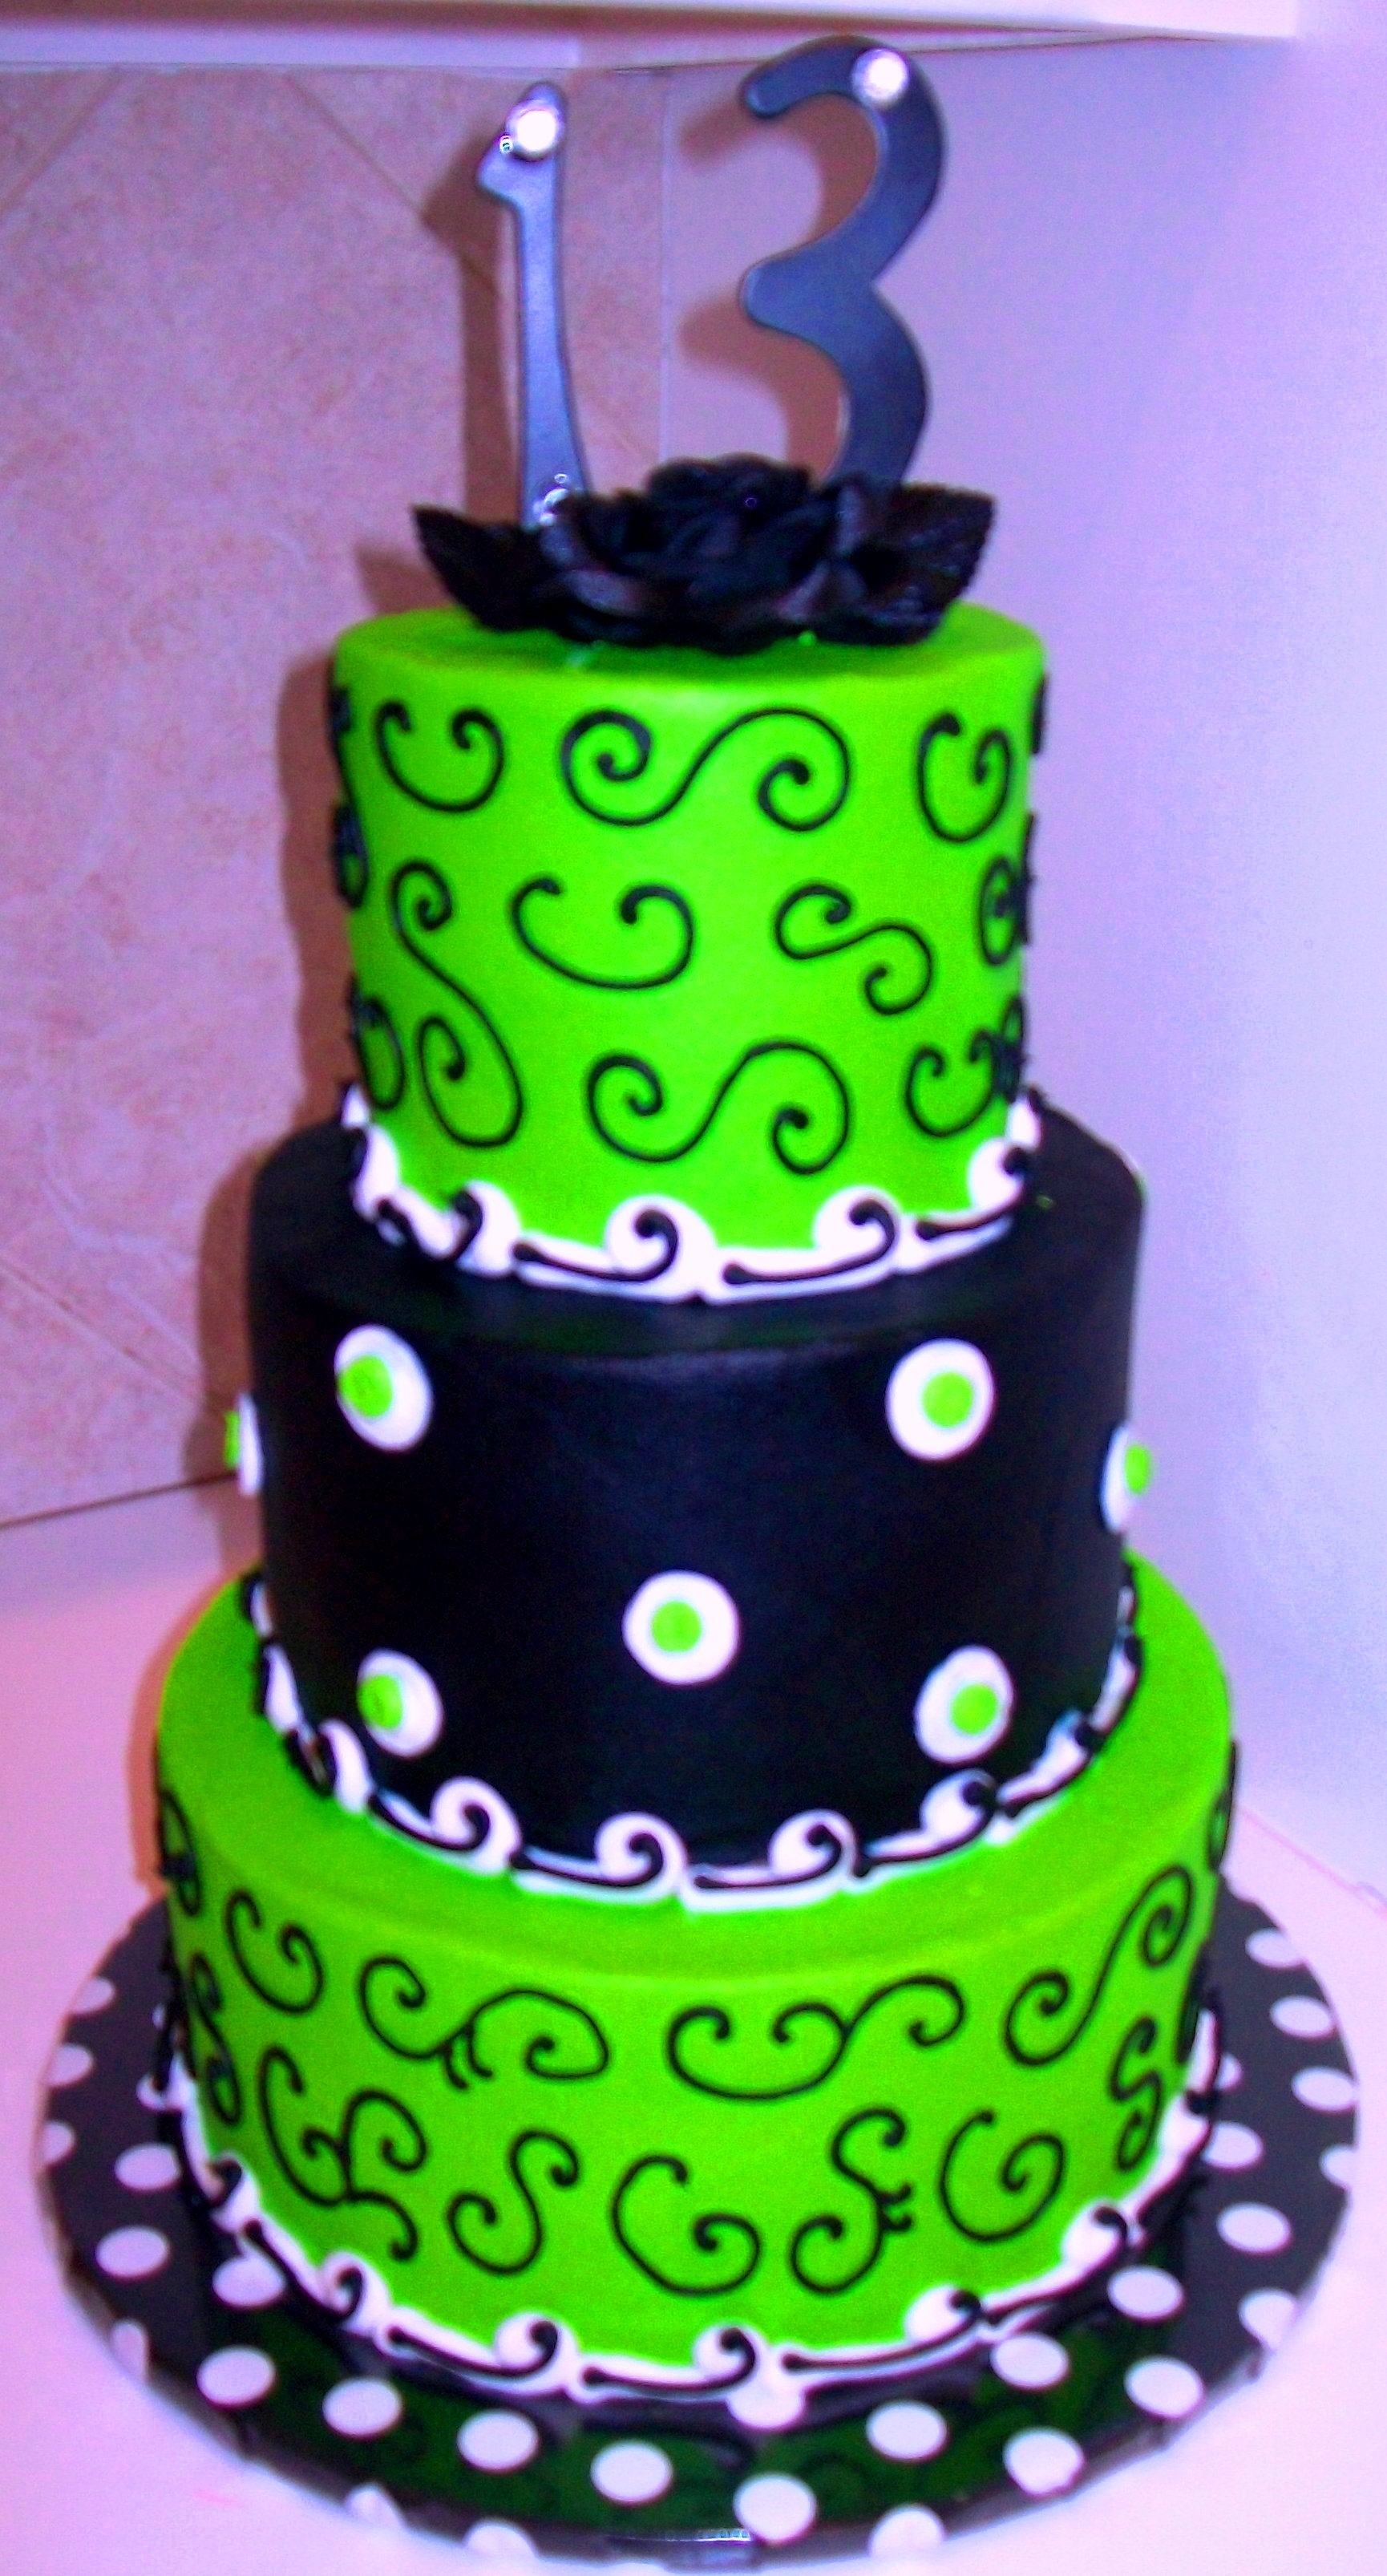 13th-birthday-cakes-5-most-suited-styles-for-teen-boys-and-girls